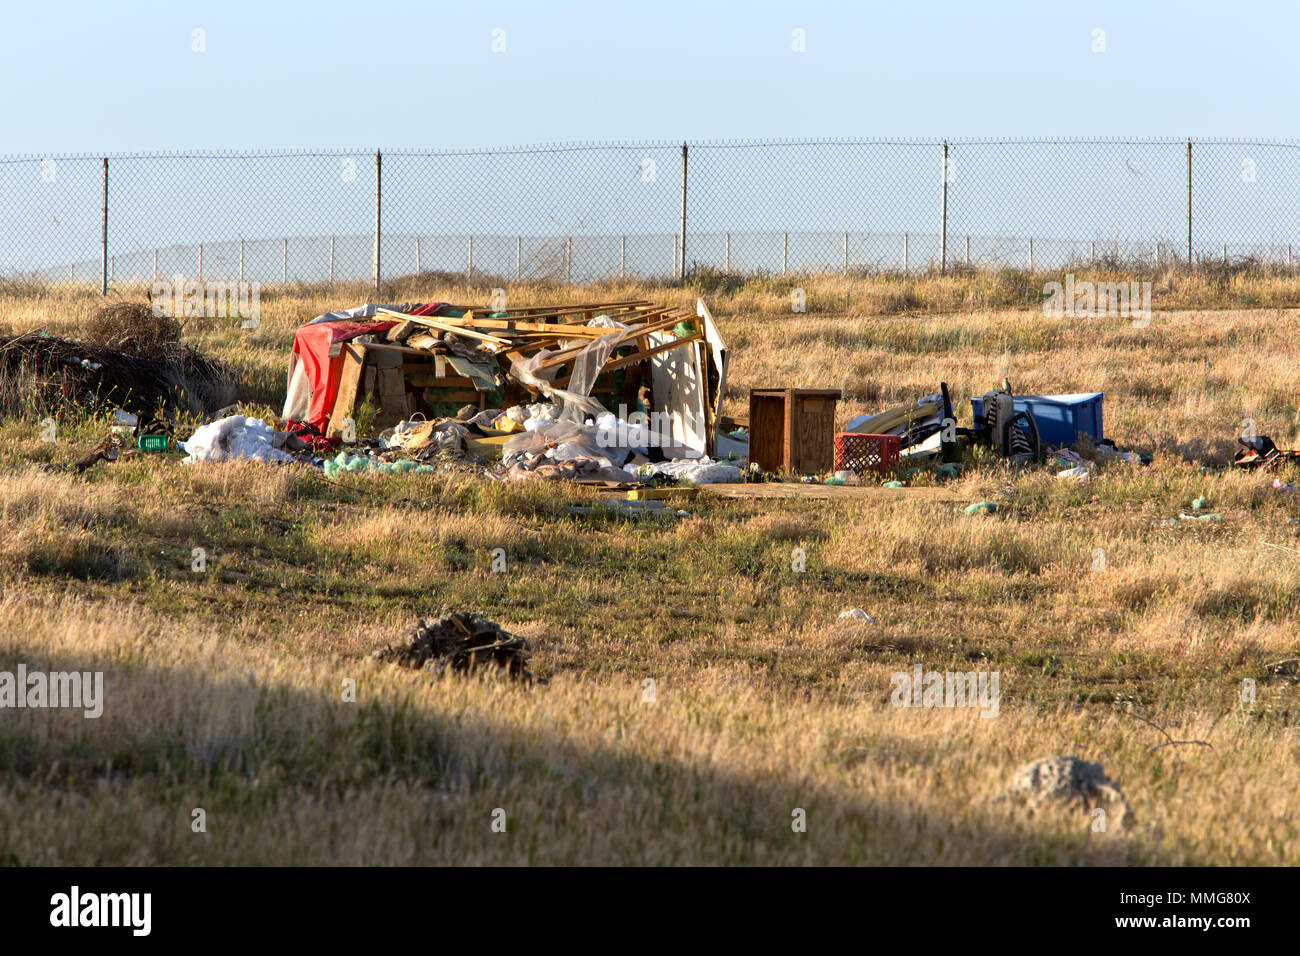 Homeless Camp against cyclone fence, dry grass, hillside. Stock Photo